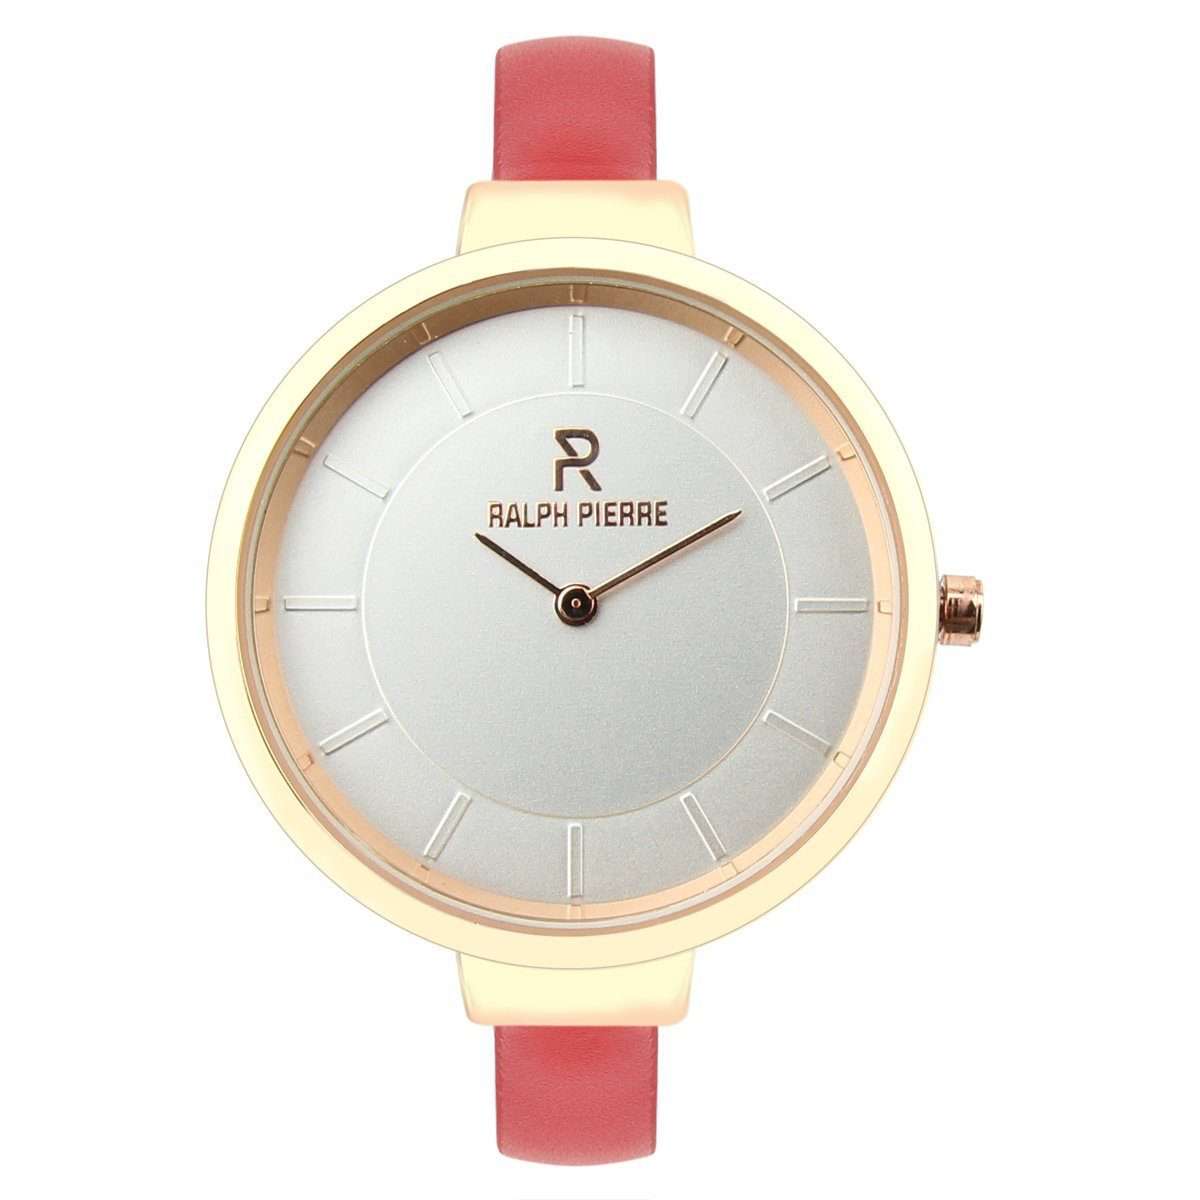 Ralph Pierre Sublime Blush Analog Watch With White Dial & Red Strap 